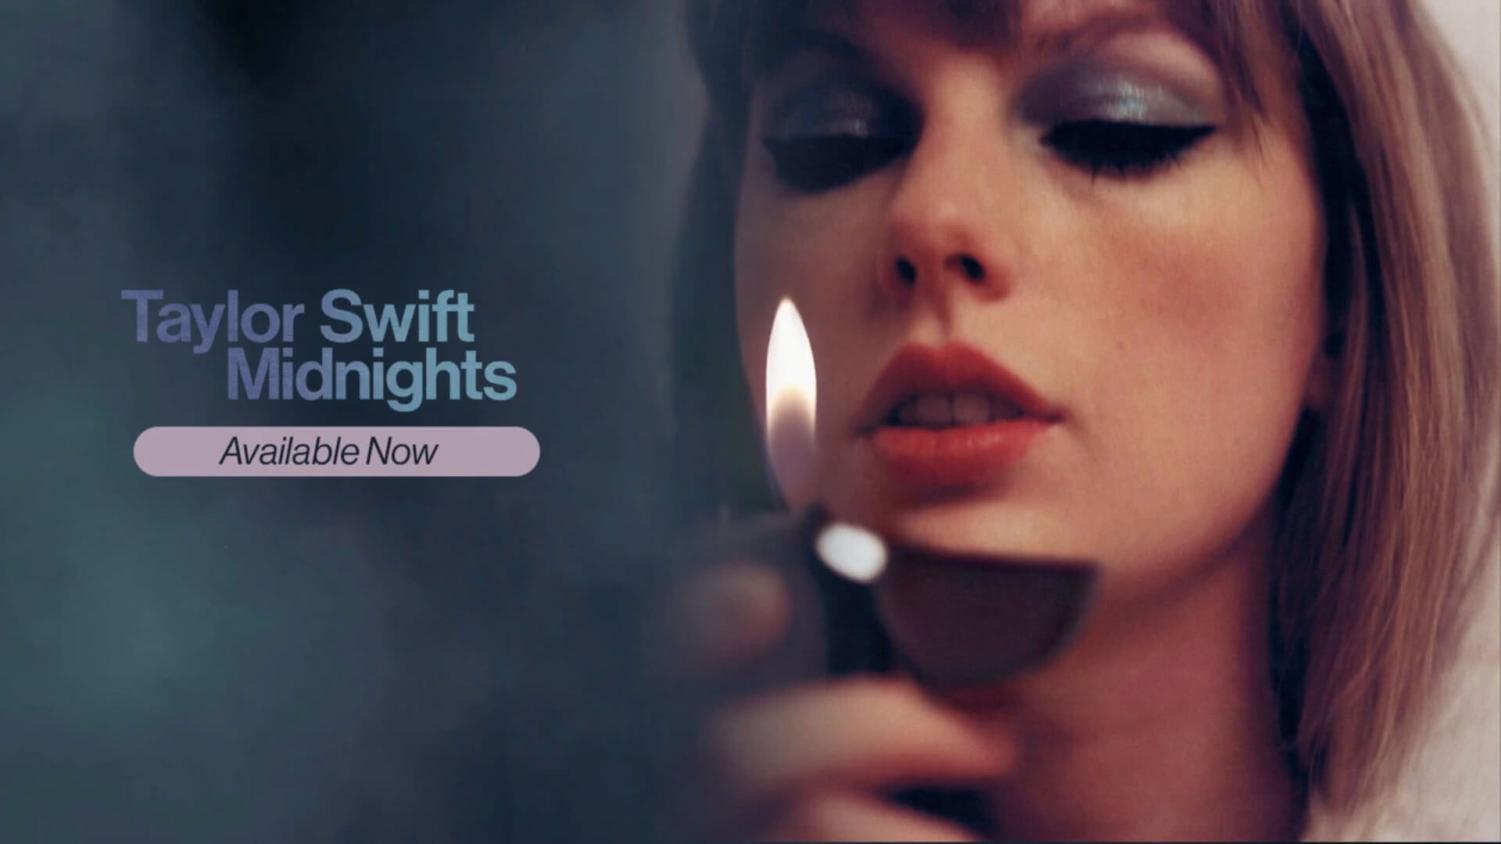 If Taylor Swift Wants Another 'Midnights' Single, One Track Seems